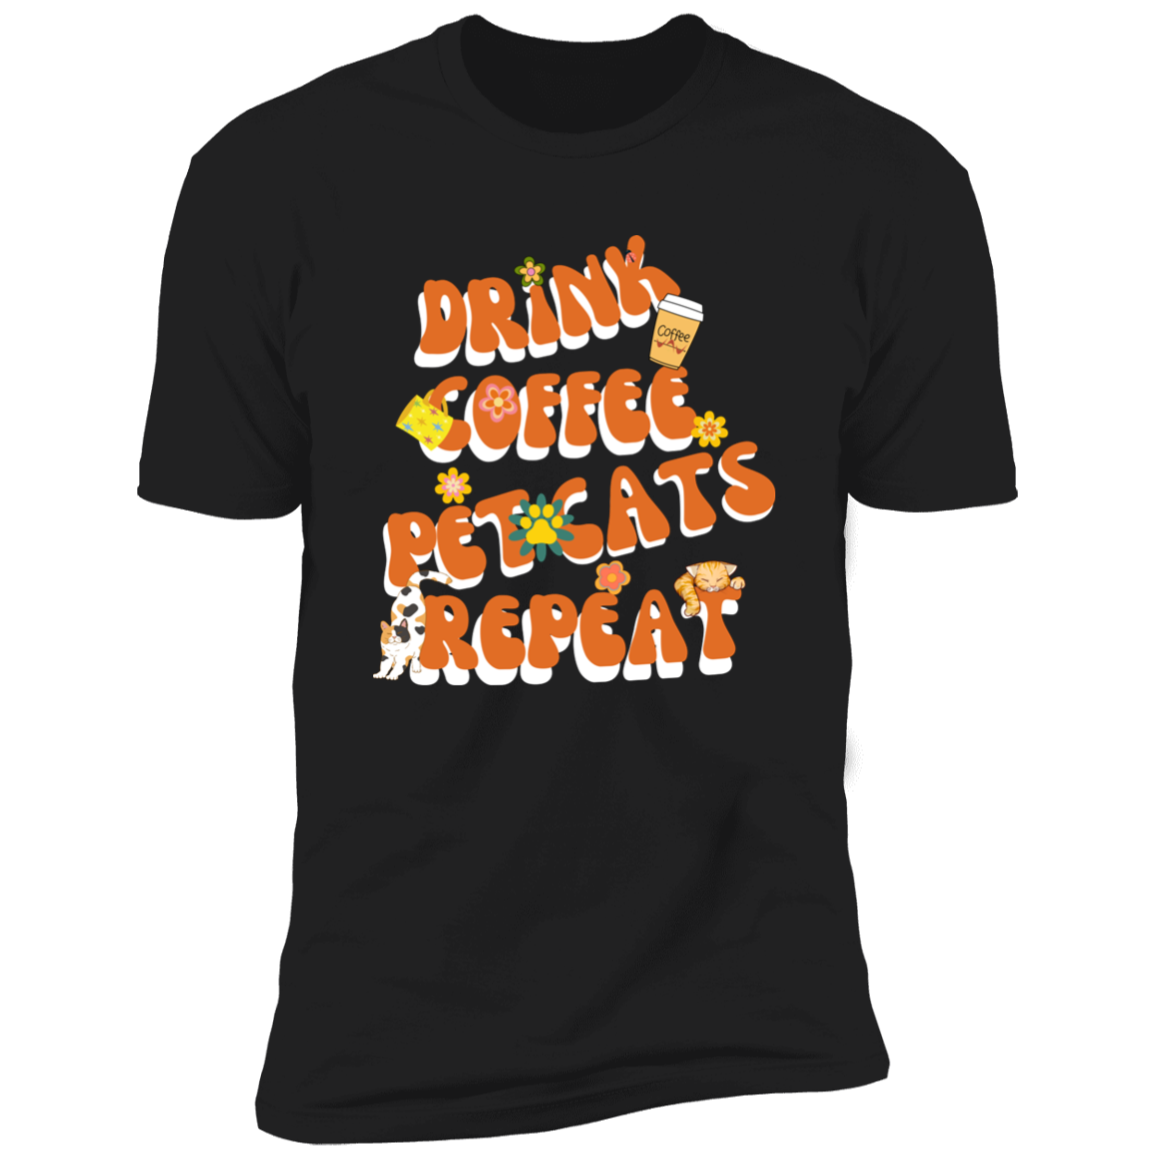 Drink Coffee Pet Cats Repeat T-shirt, Cat t-shirt for humans, in black 